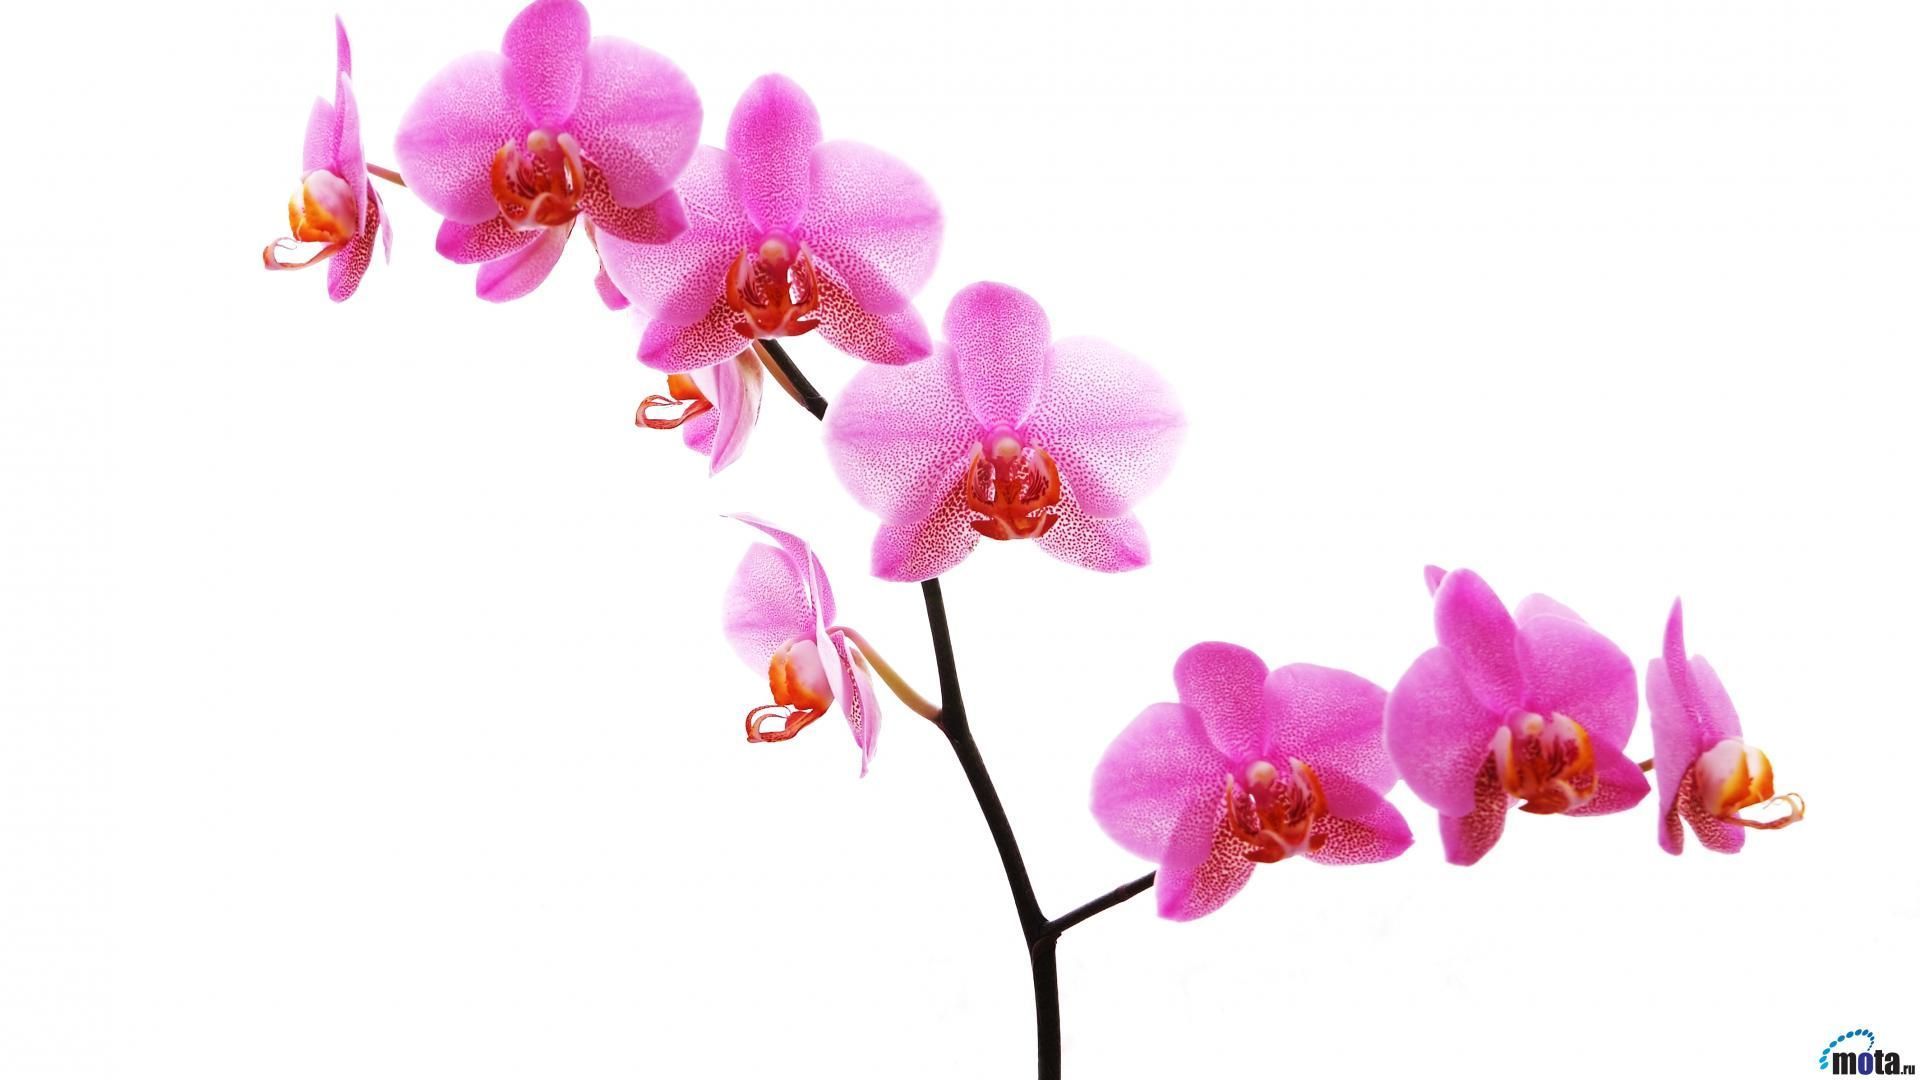 Top Orchid White Phone Wallpaper Images for Pinterest